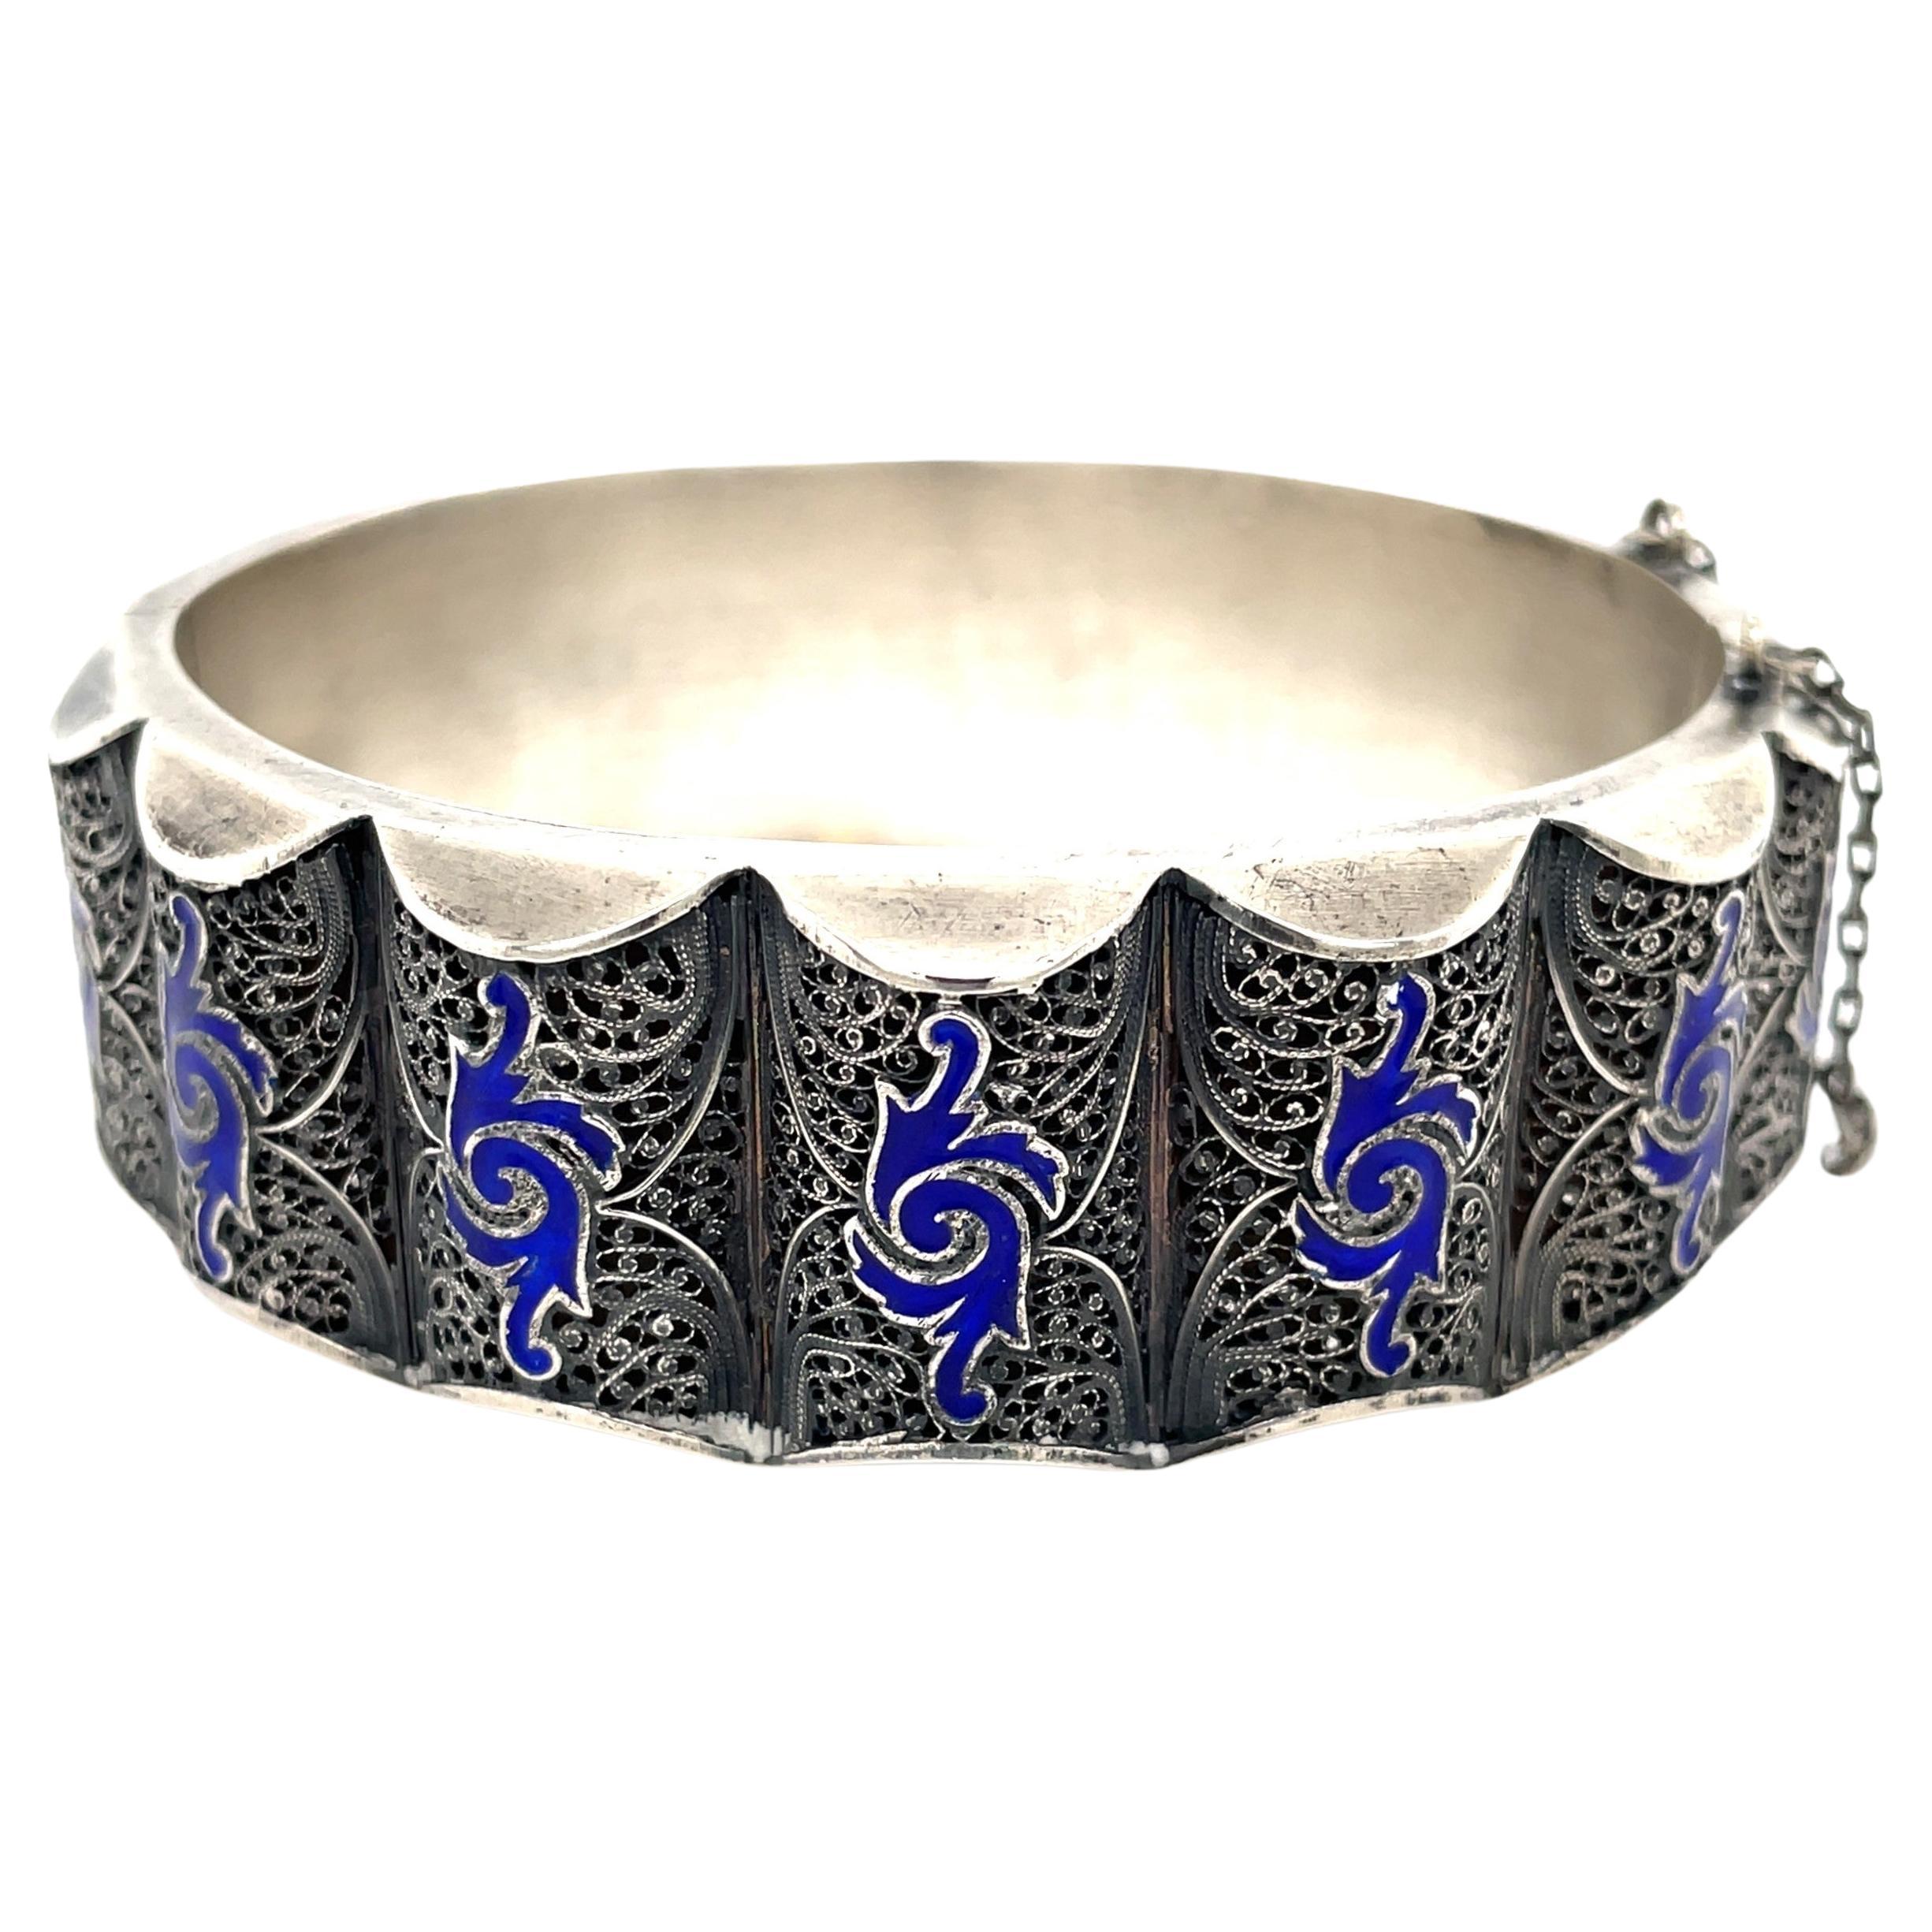 Wear a work of art with this early 19th century silver filigree cuff bracelet with vivid cobalt blue cloisonne enamel accents. Intricate hand crafted .900 silver filigree presents around this unique 2-1/2 inch bangle bracelet. The width is